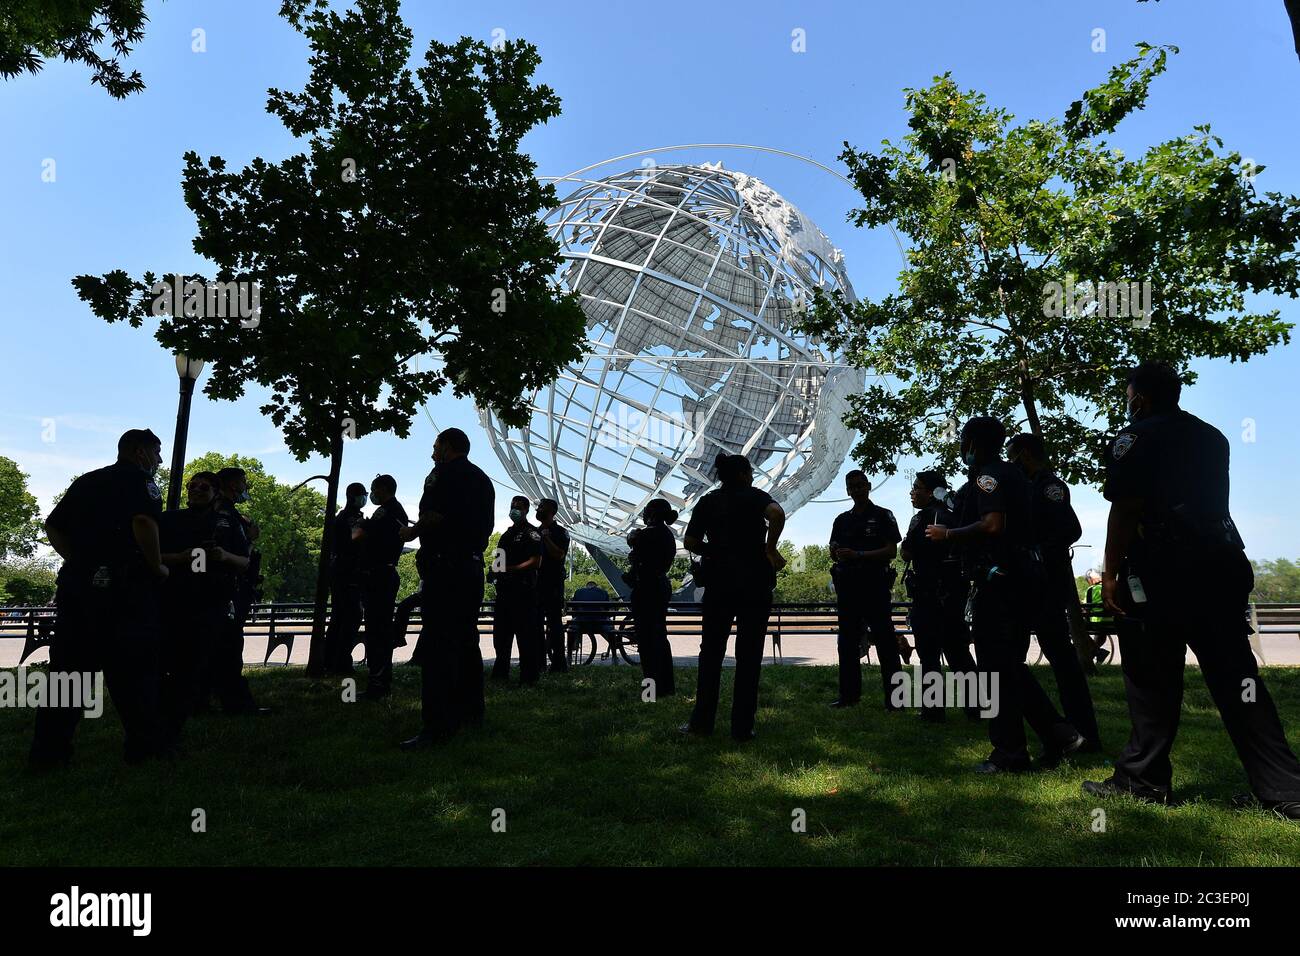 NYPD officers stand a few yards back in the shade at a peaceful celebration rally for Juneteenth takes place in front of hte Unisphere in Flushing Meadows-Corona Park in the borough of Queens, New York, June 19, 2020. Juneteenth is celebrated as a commemoration of the ending of slavery in the United States.   given on January 1, 1983, Credit: Sipa USA/Alamy Live News Stock Photo